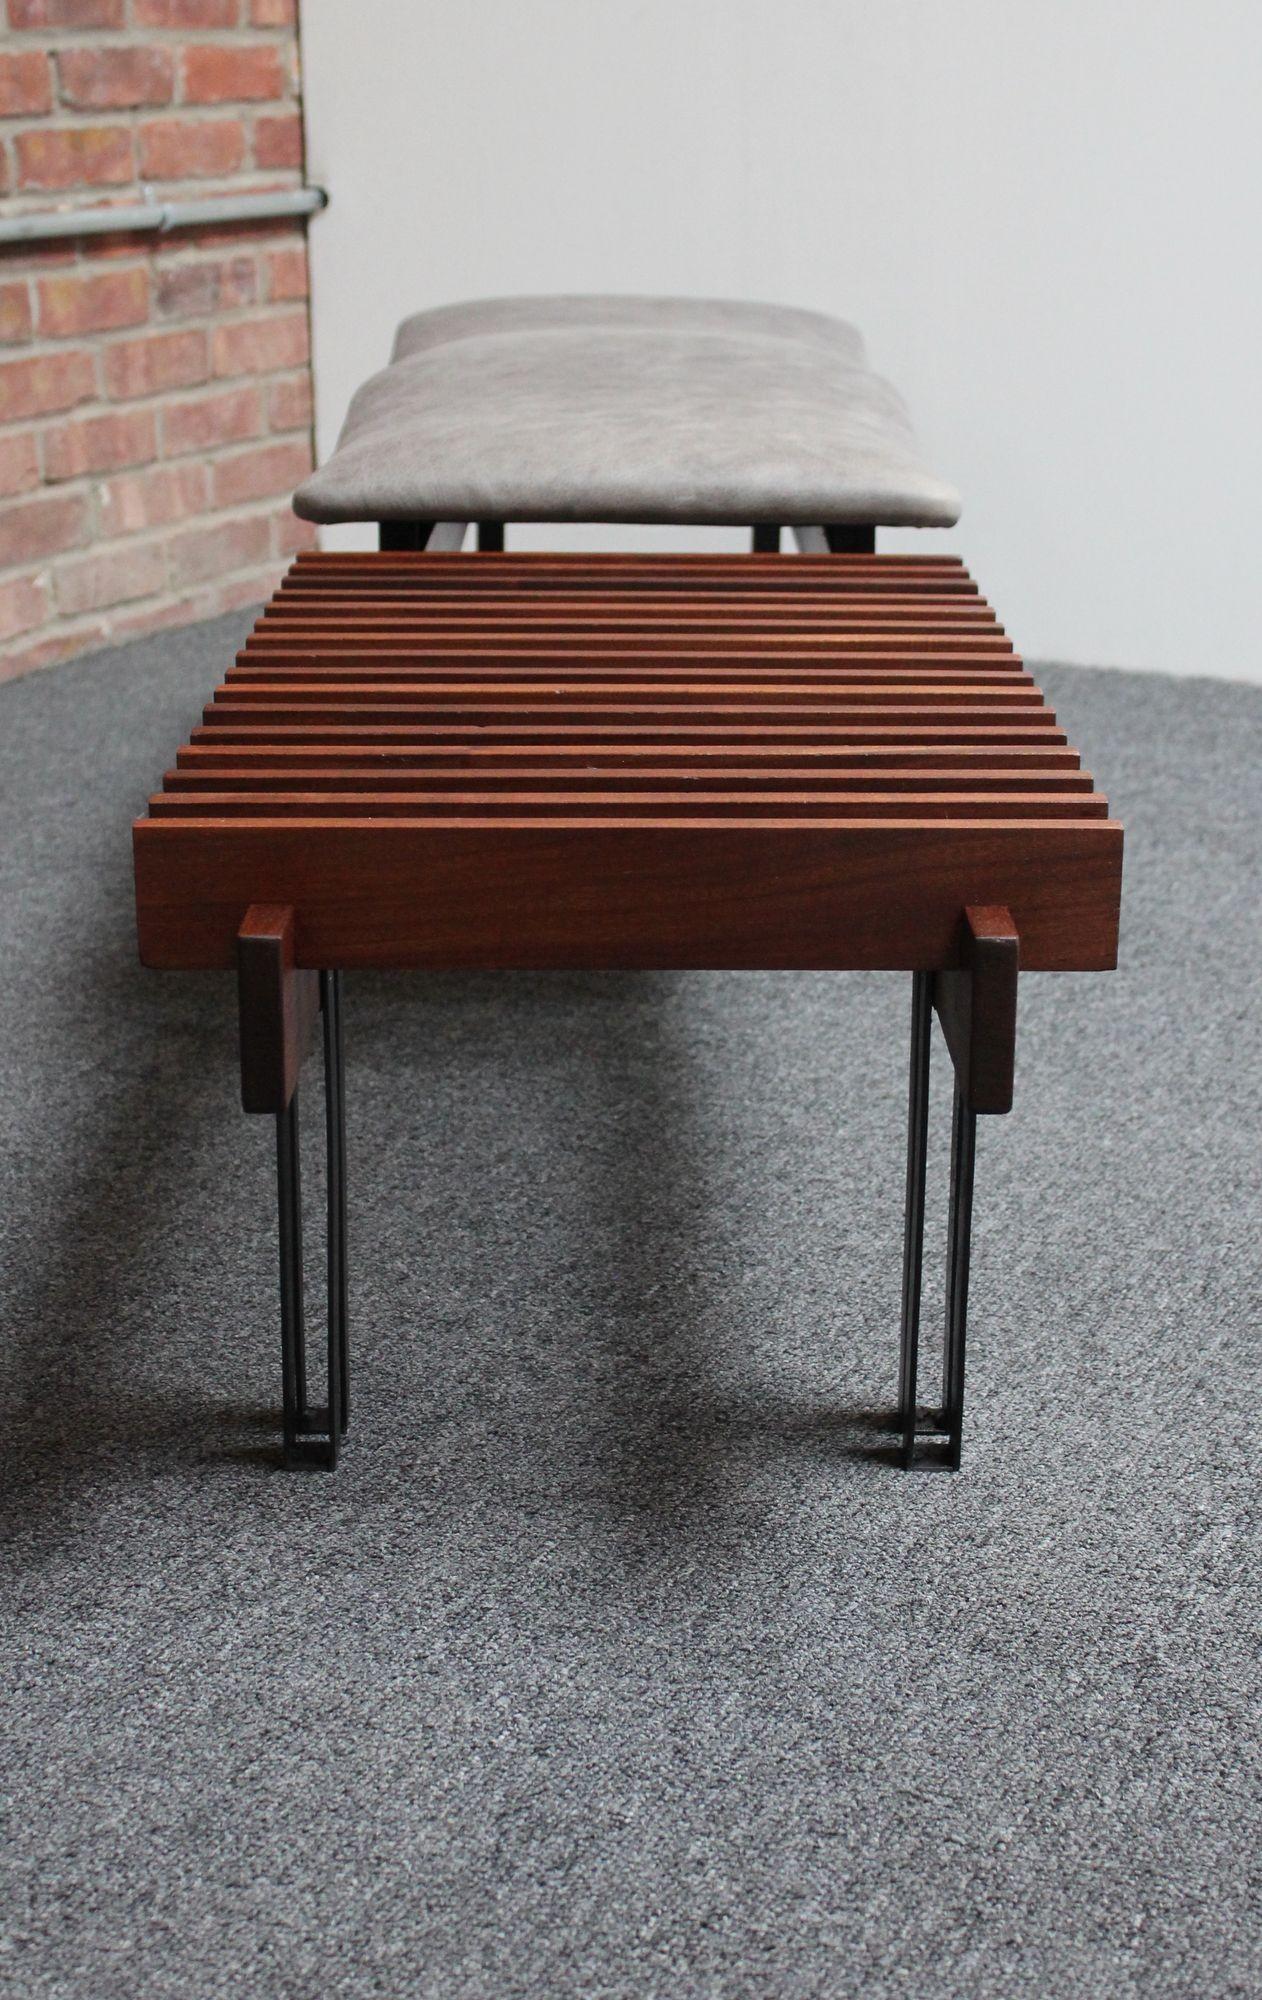 Italian Modernist Teak and Leather Bench by Inge and Luciano Rubino For Sale 1